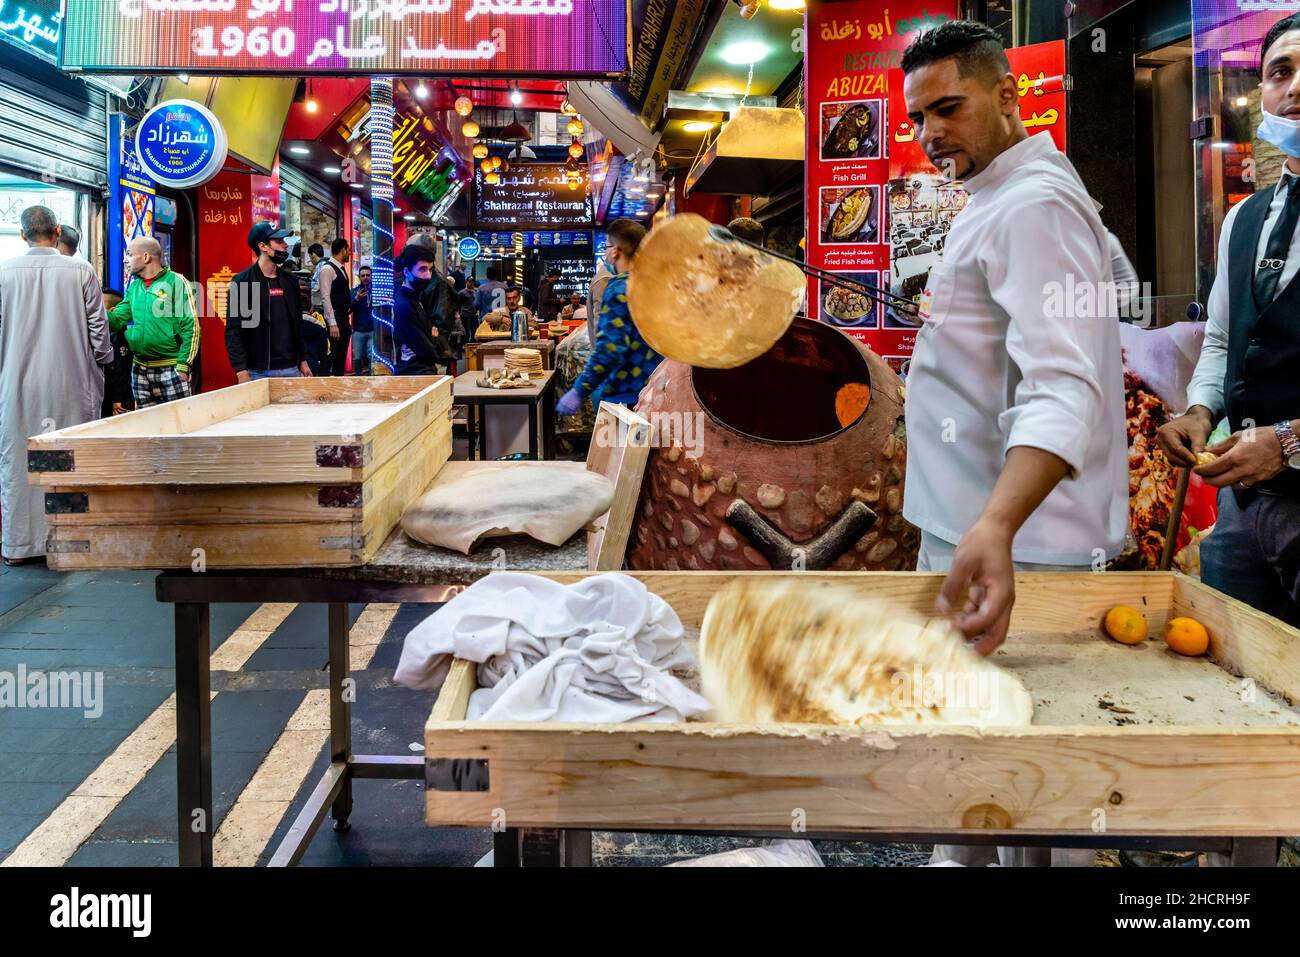 A Young Man Putting A Traditional Flat Bread In To An Oven, Abuzaghleh Restaurant, Downtown Amman, Amman, Jordan. Stock Photo